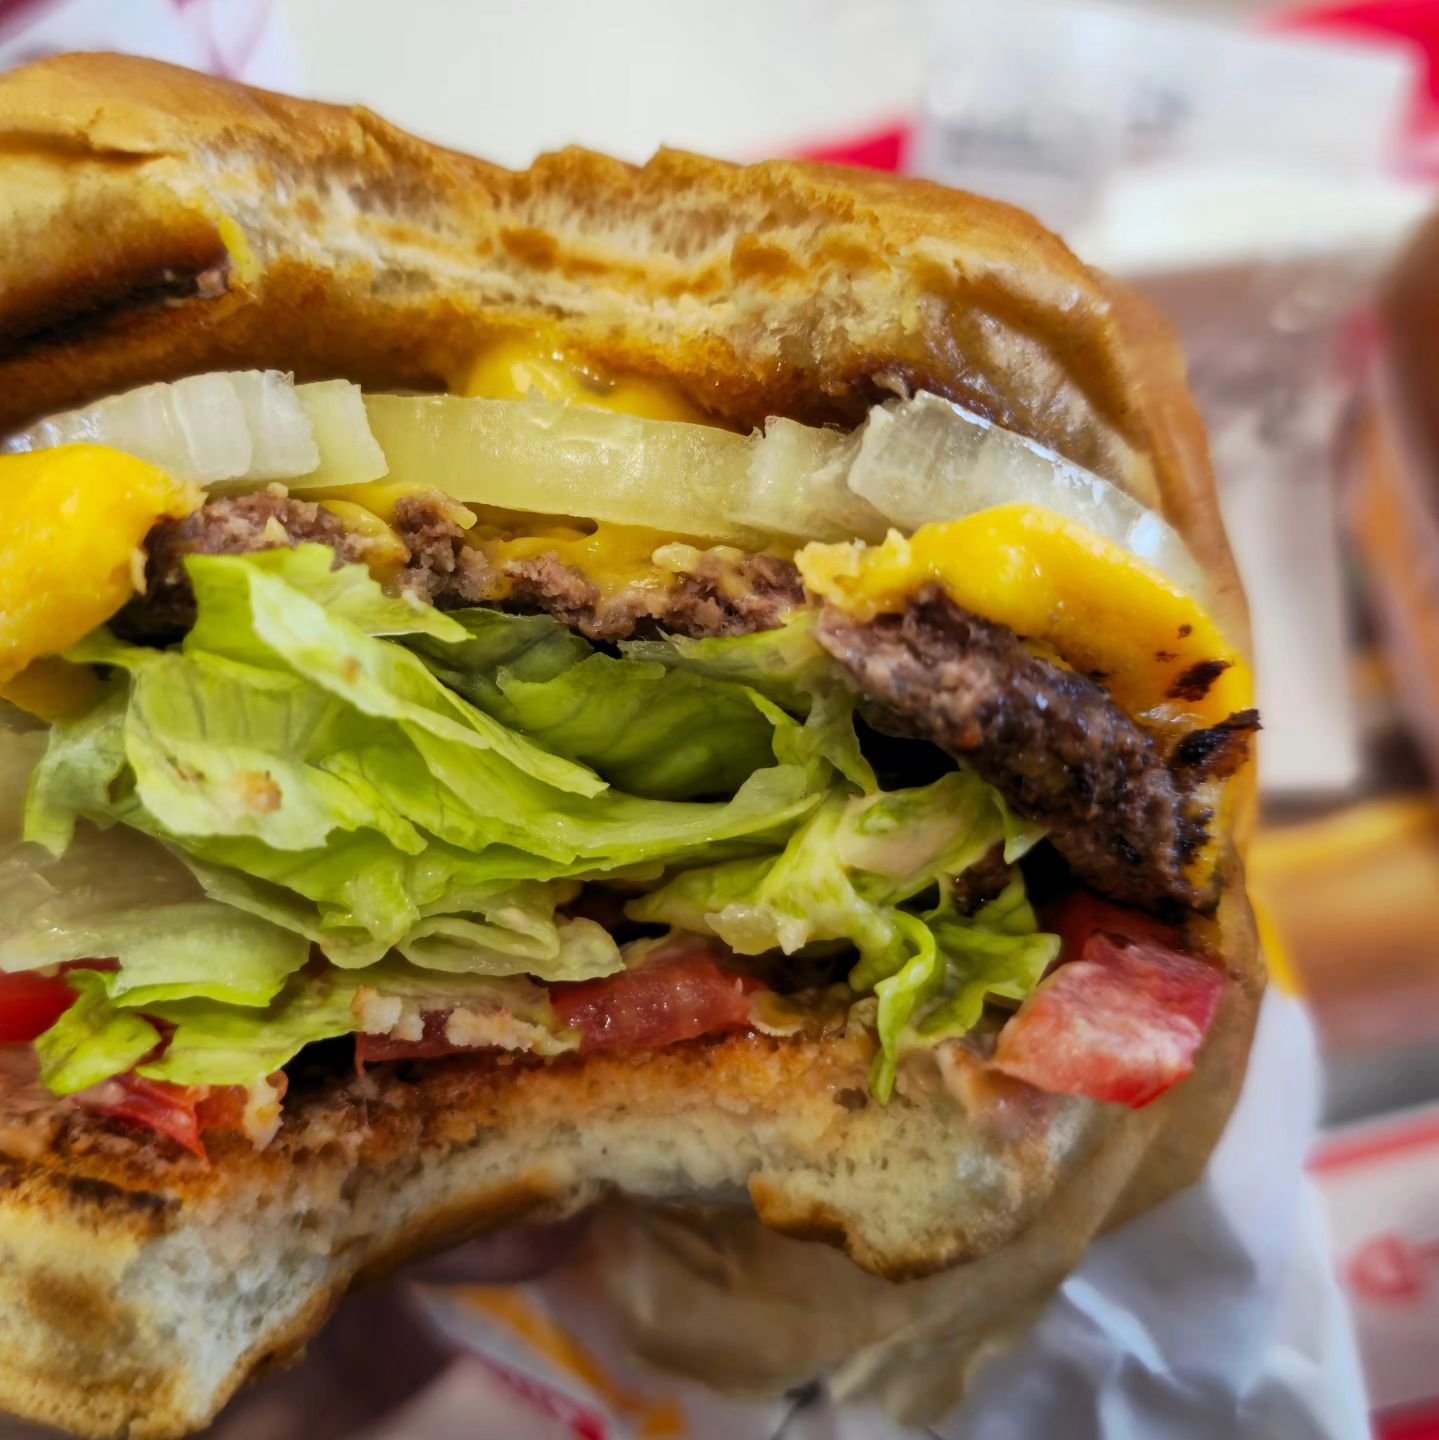 There is a reason that In and Out Burger is GOD TIER legendary GOAT status.